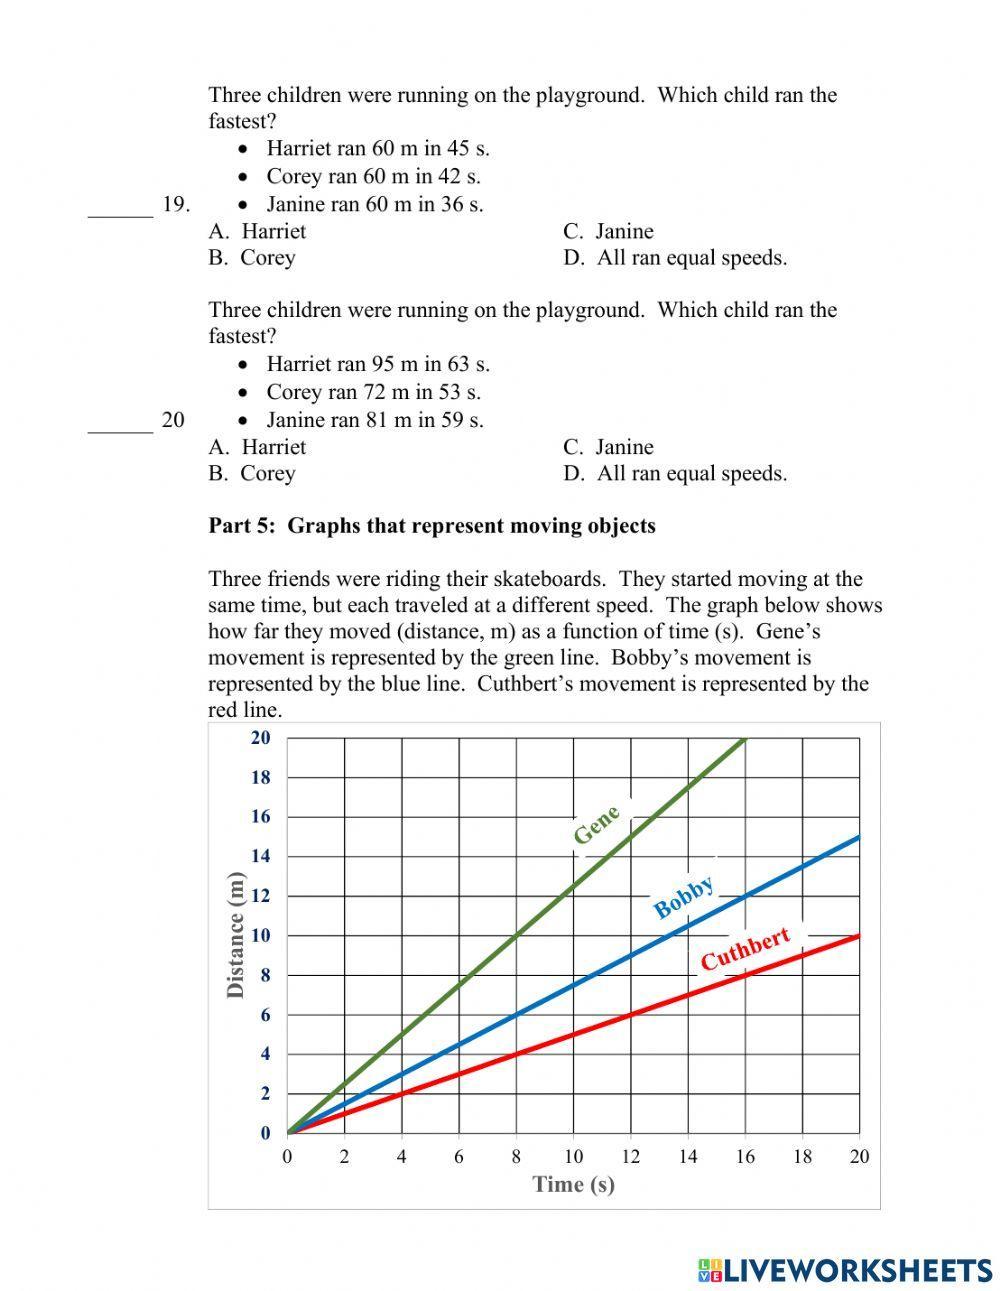 Speed and Velocity Calculations